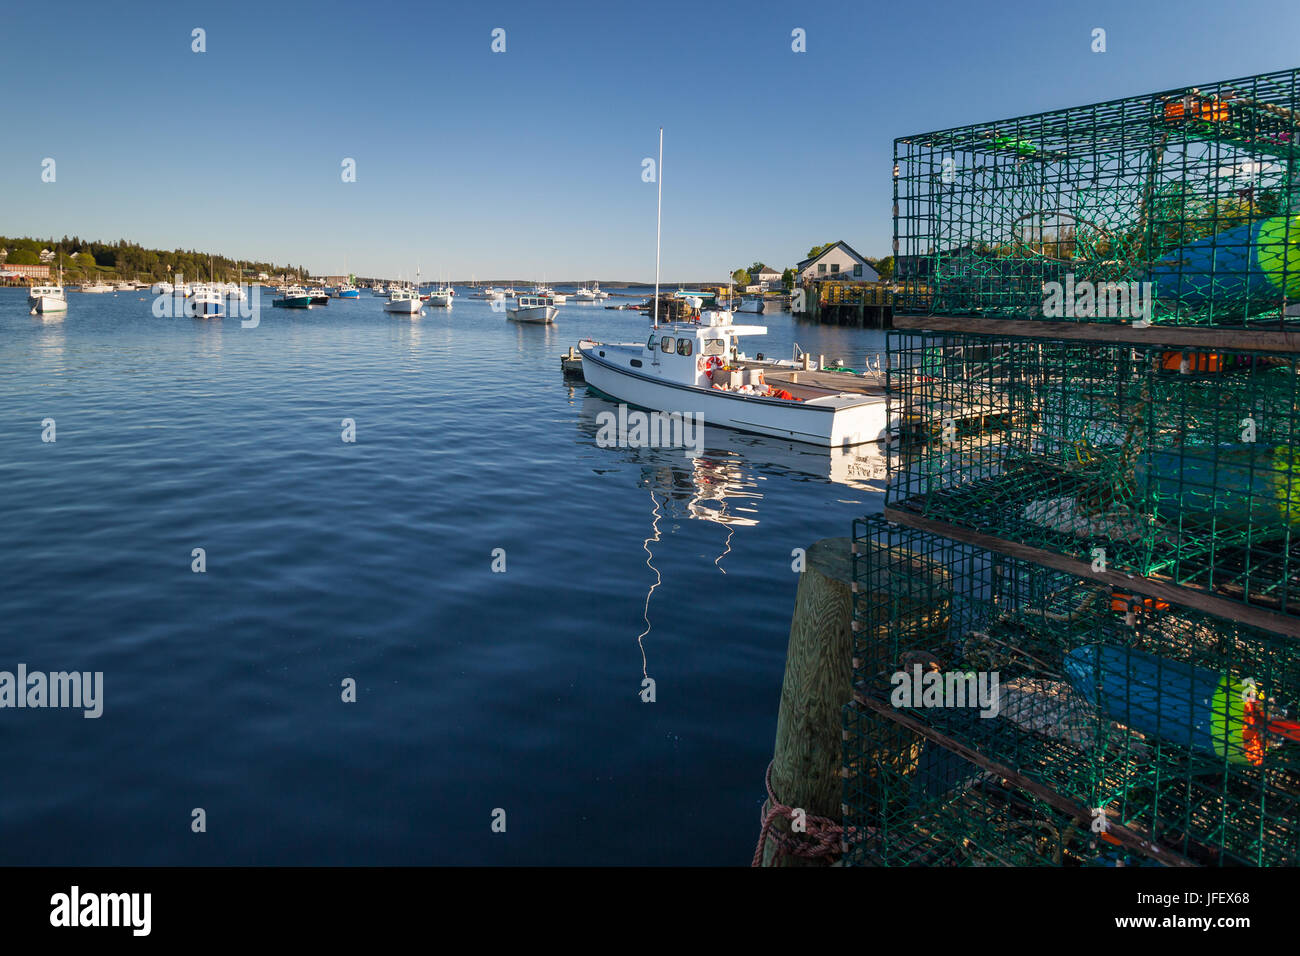 Lobster and fishing boats in Bass Harbor, Maine Stock Photo